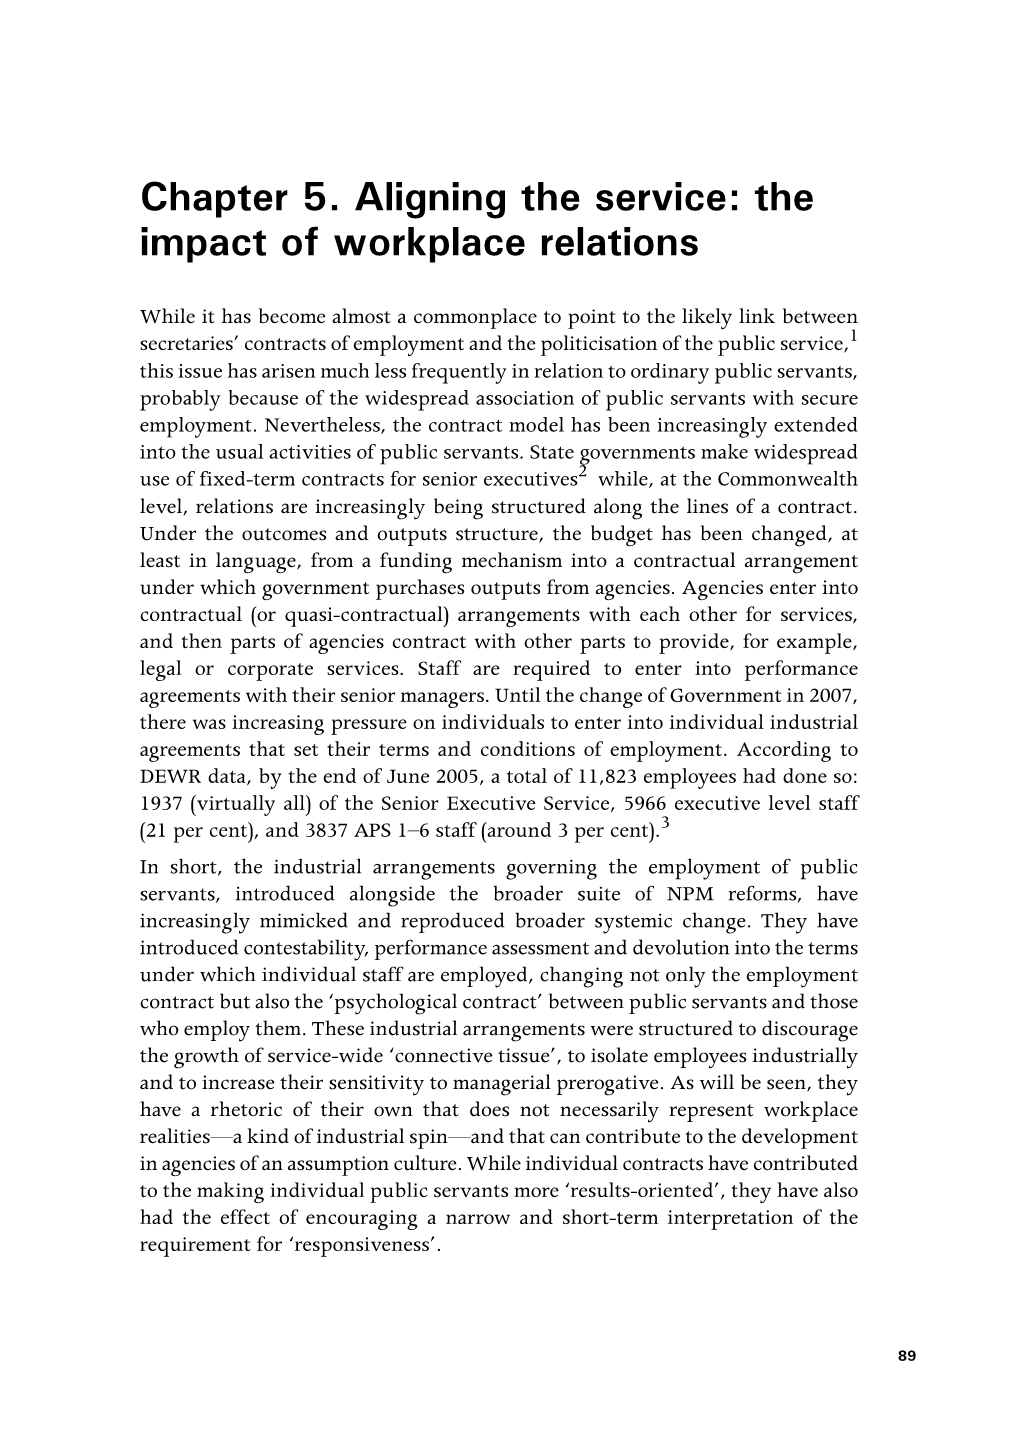 The Impact of Workplace Relations